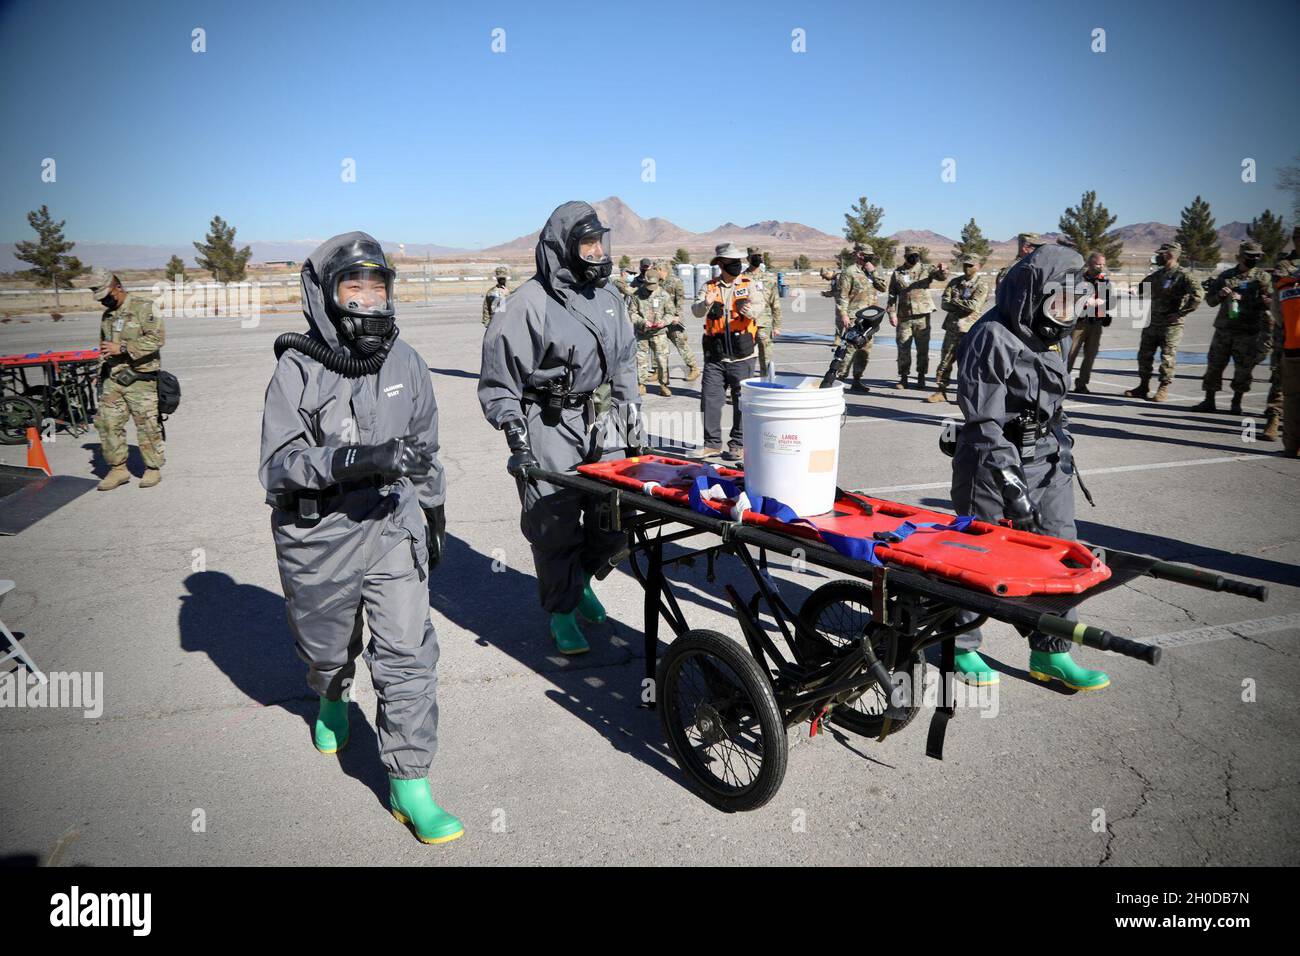 Soldiers from the 409th Engineer Company, Task Force 76, 76th Operational Response Command move supplies on a stretcher during a Chemical, Biological, Radiological and Nuclear (CBRN) disaster response mass casualty decontamination exercise at the Sam Boyd Stadium in Las Vegas, Nevada, Jan. 30. The exercise involves approximately 200 Army Reserve Soldiers as well as local civilian agencies such as the Las Vegas and Henderson Fire Departments. The Soldiers from Task Force 76 specialize in search and rescue, chemical decontamination and medical treatment operations. Stock Photo